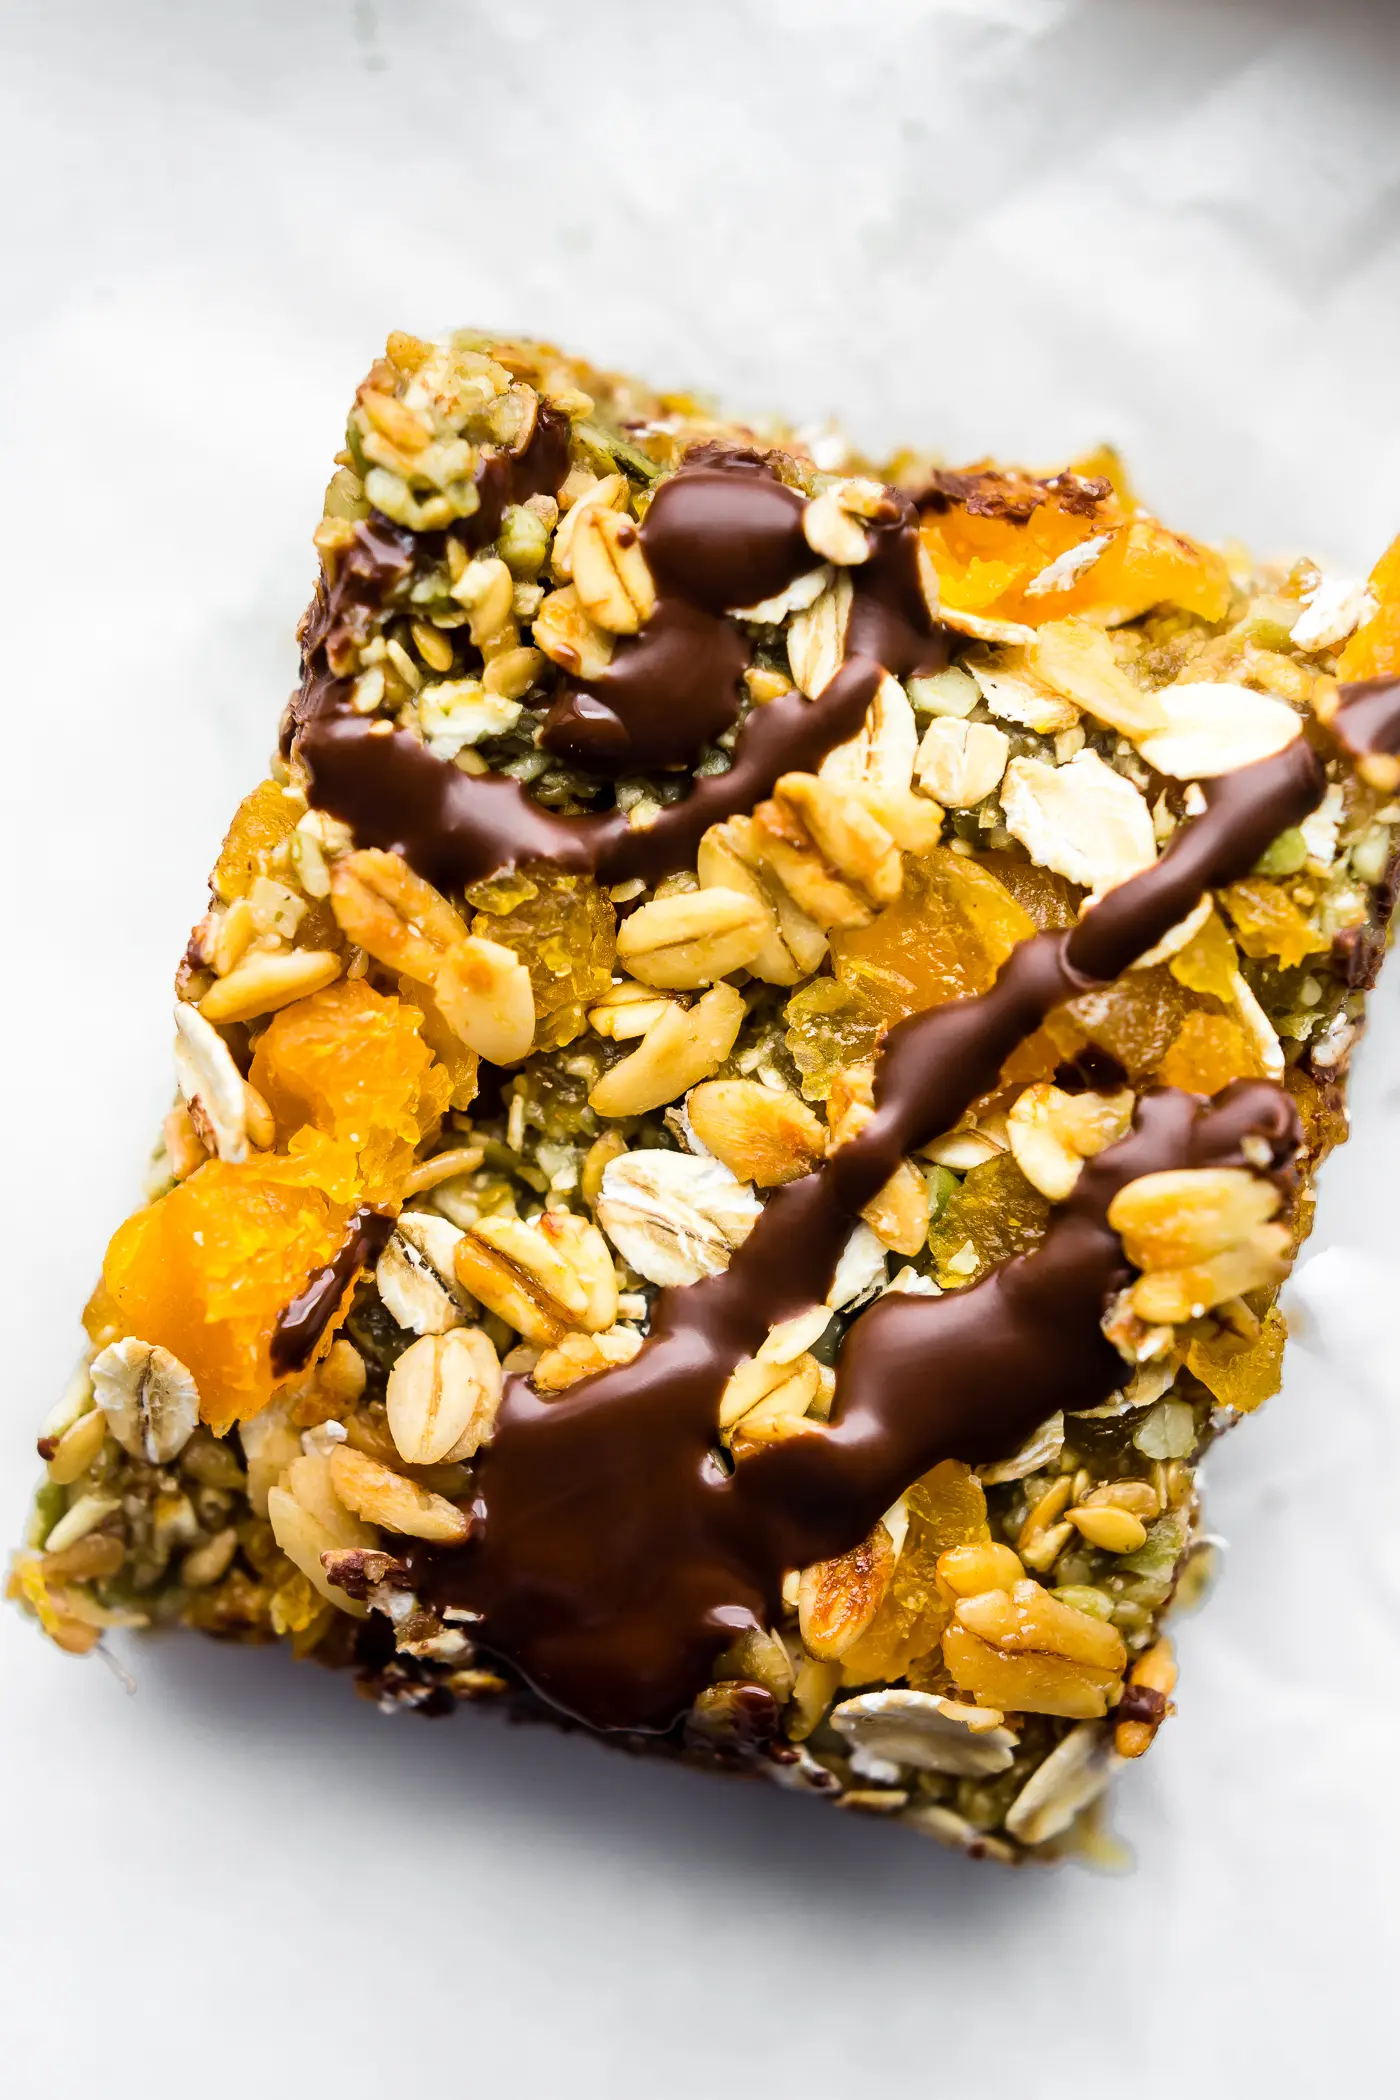 A piece of granola bar with chocolate drizzle.